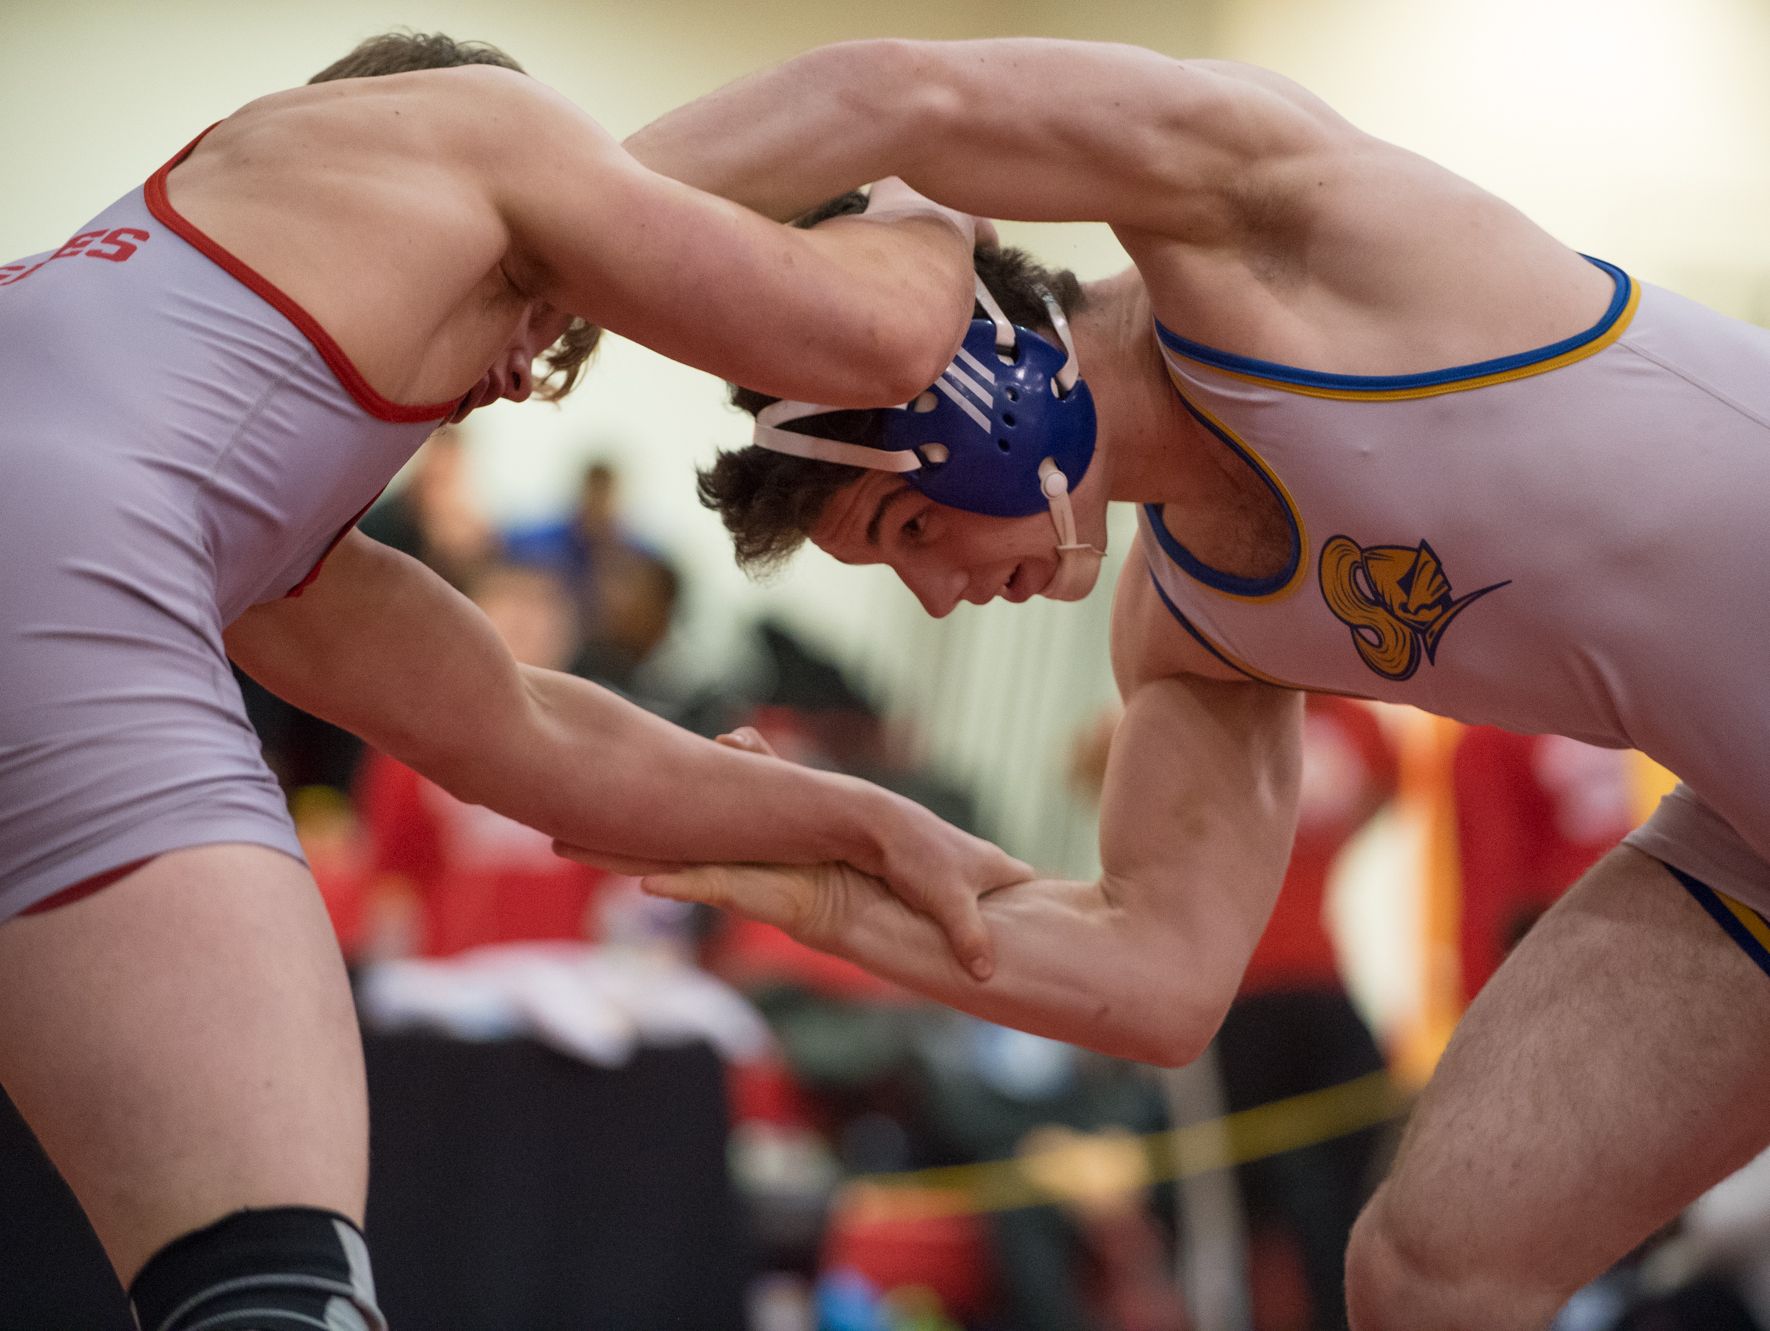 Smyrna's Larsen Wilson, left, and Sussex Central's Lucas Hudson square off in the 182 pound match at DIAA Dual Meet Wrestling State Championship at Smyrna High School.